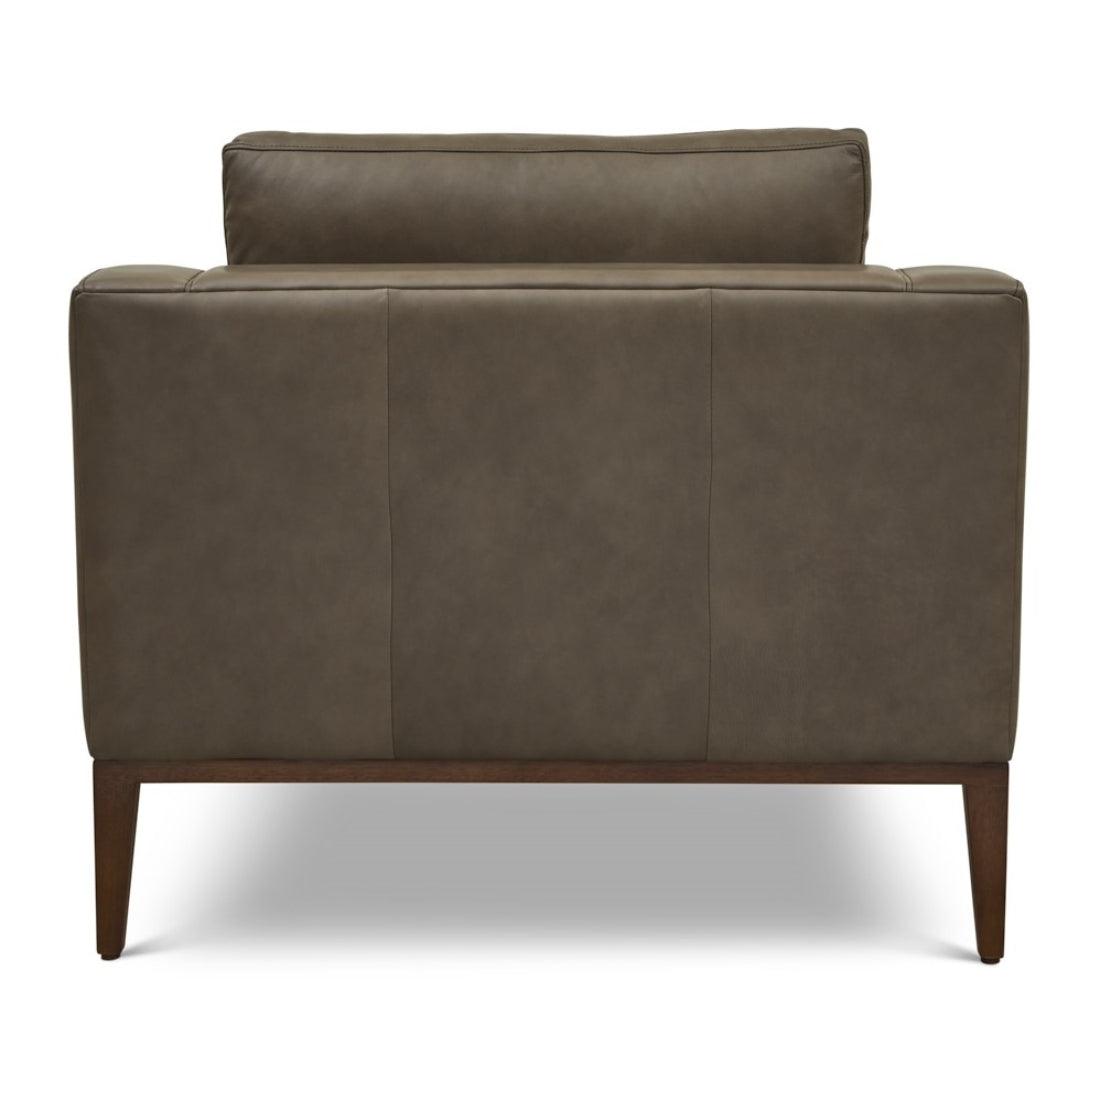 Large Leather Club Chair for Living Room - Uptown Sebastian